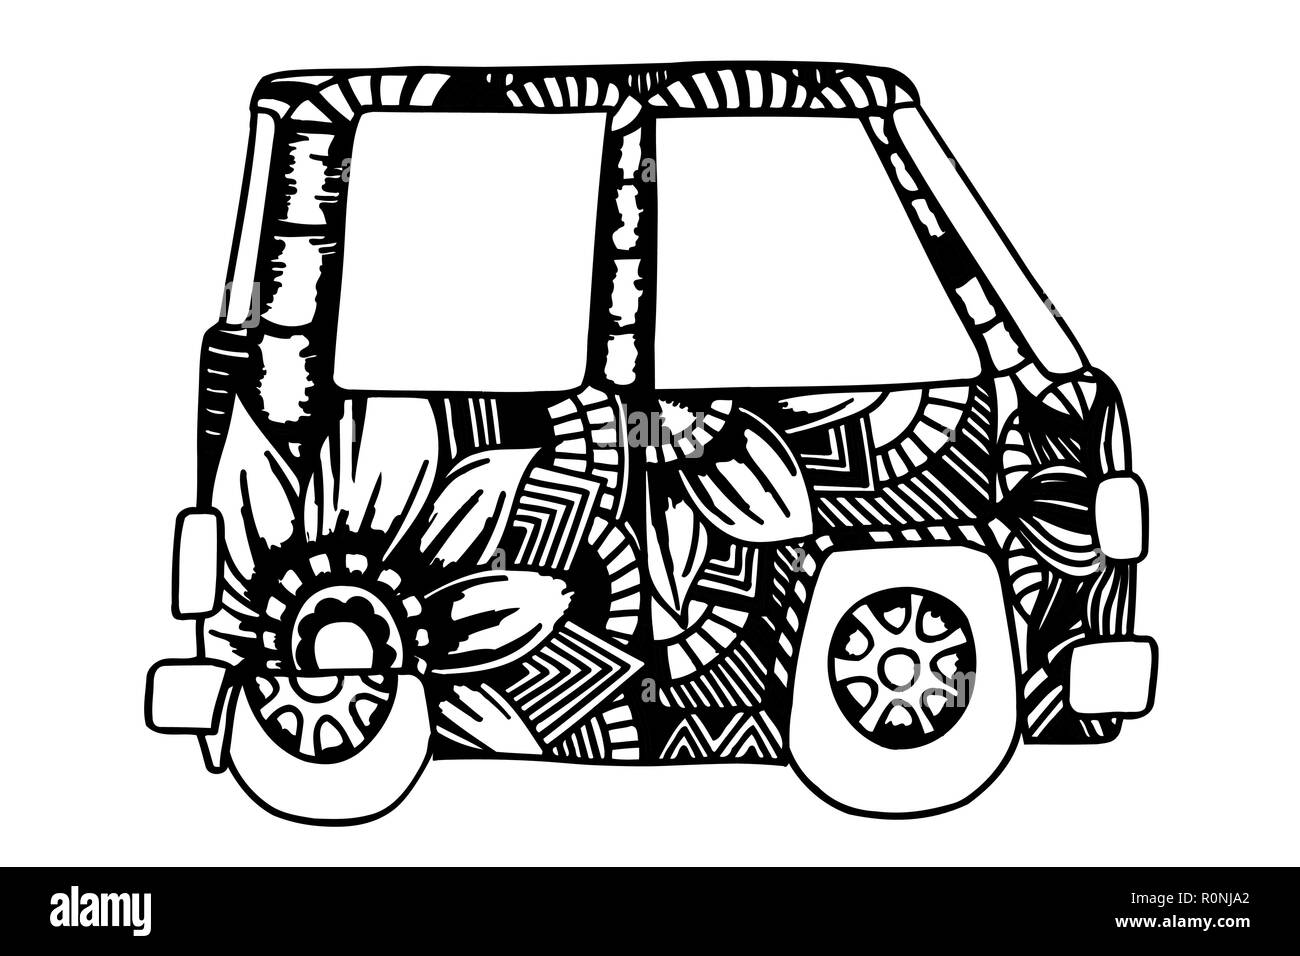 Hippie vintage car a mini van. Made by trace from sketch. Monochrome vector illustration. Stock Vector